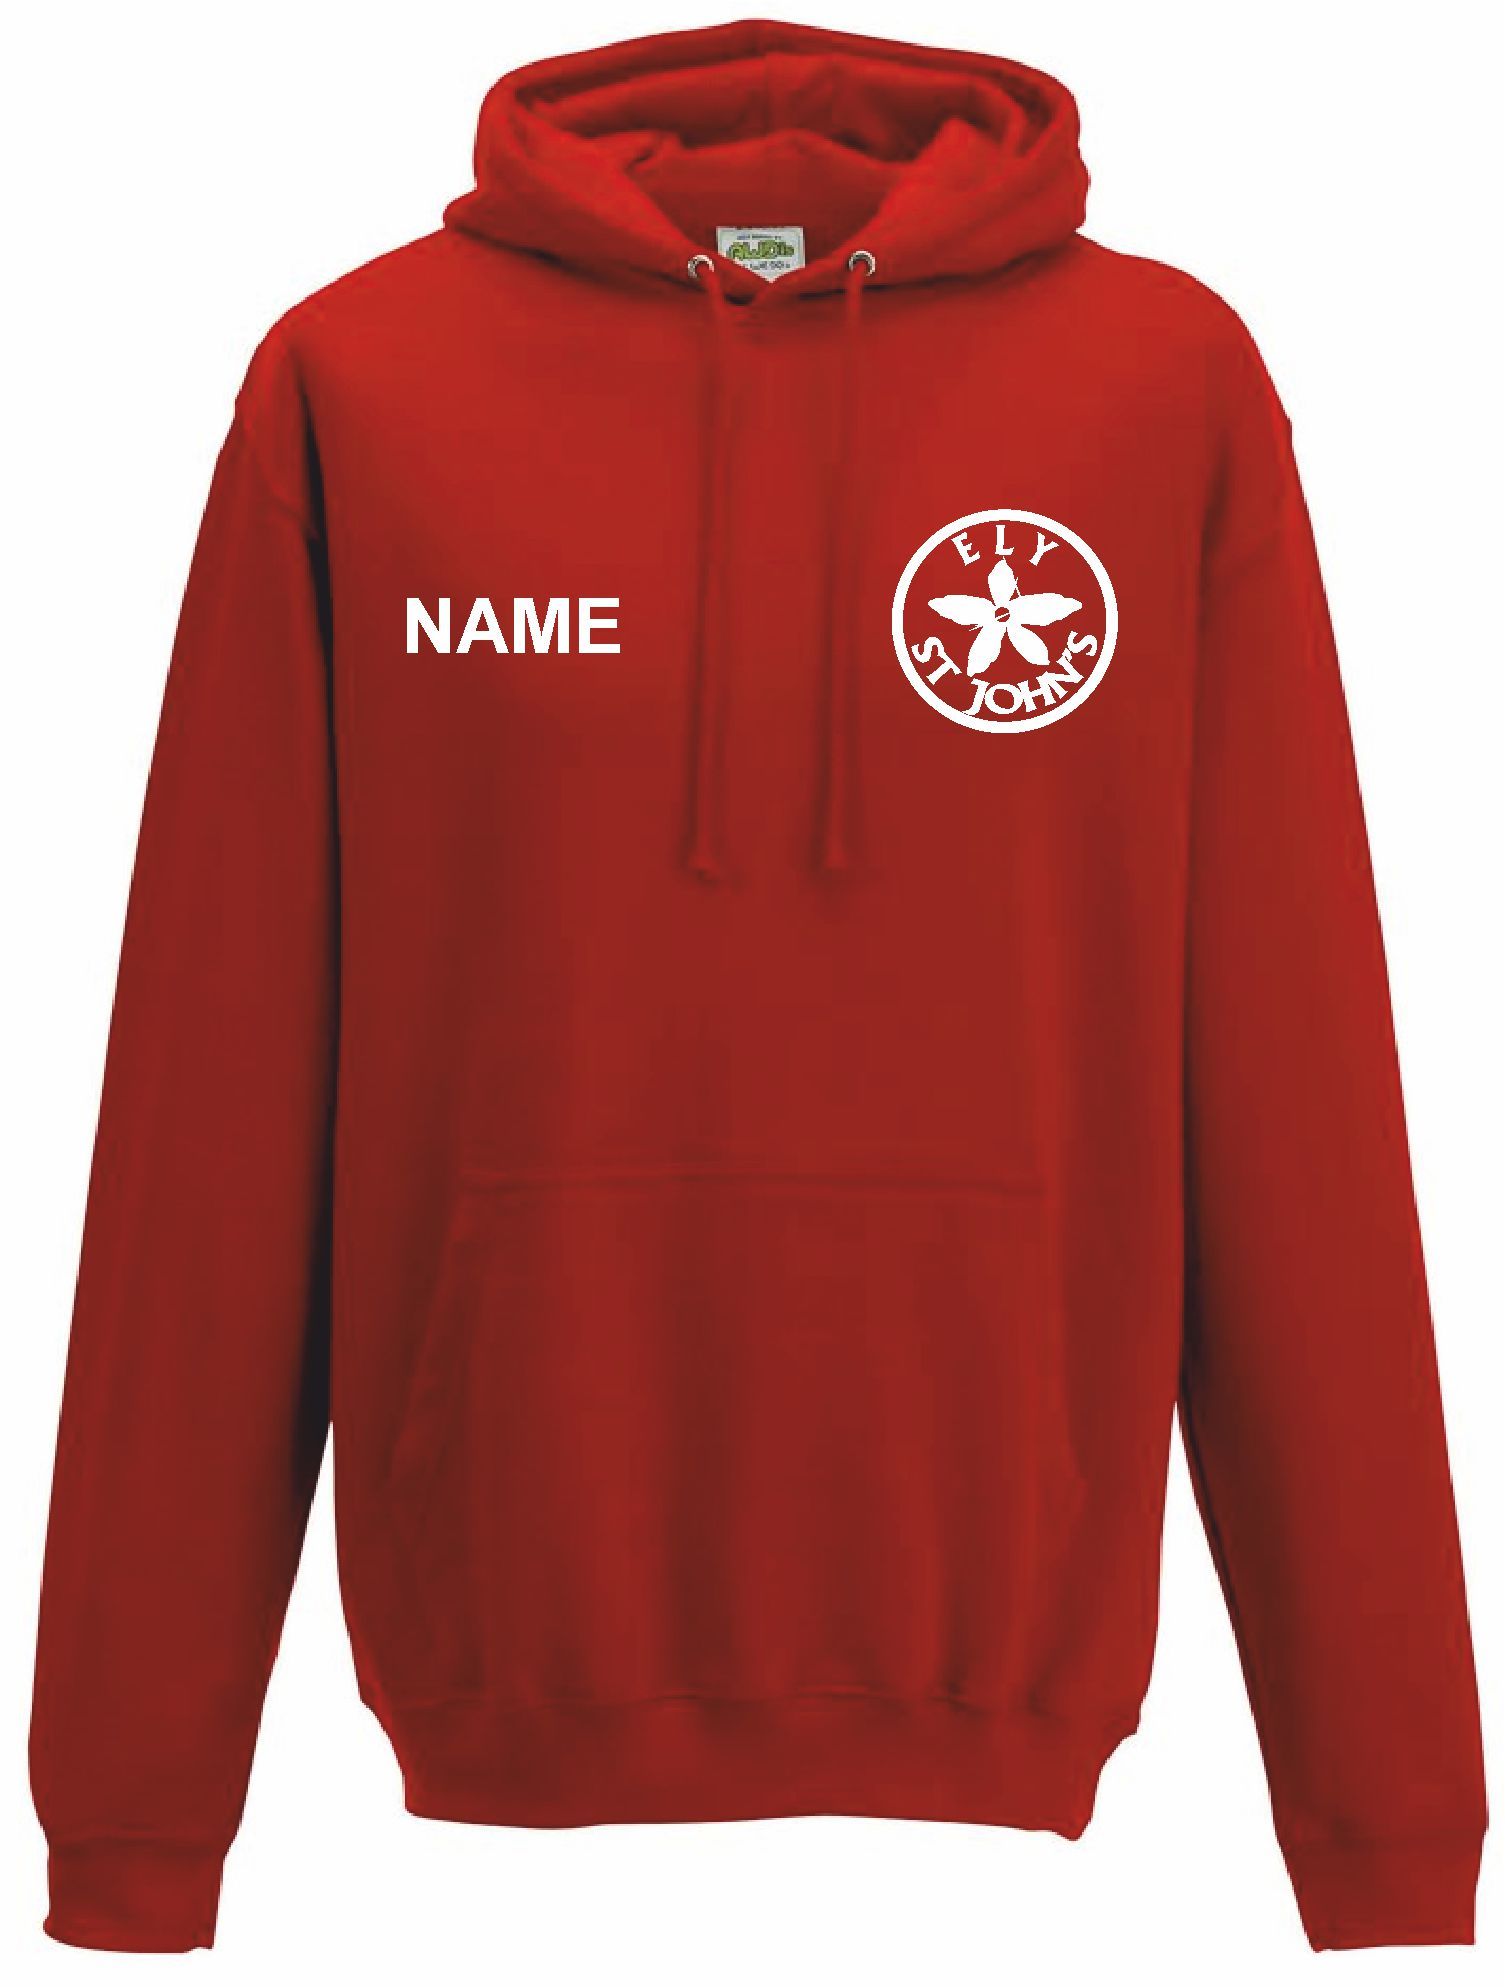 Ely St Johns- Leavers Hoodie (Adults Size)